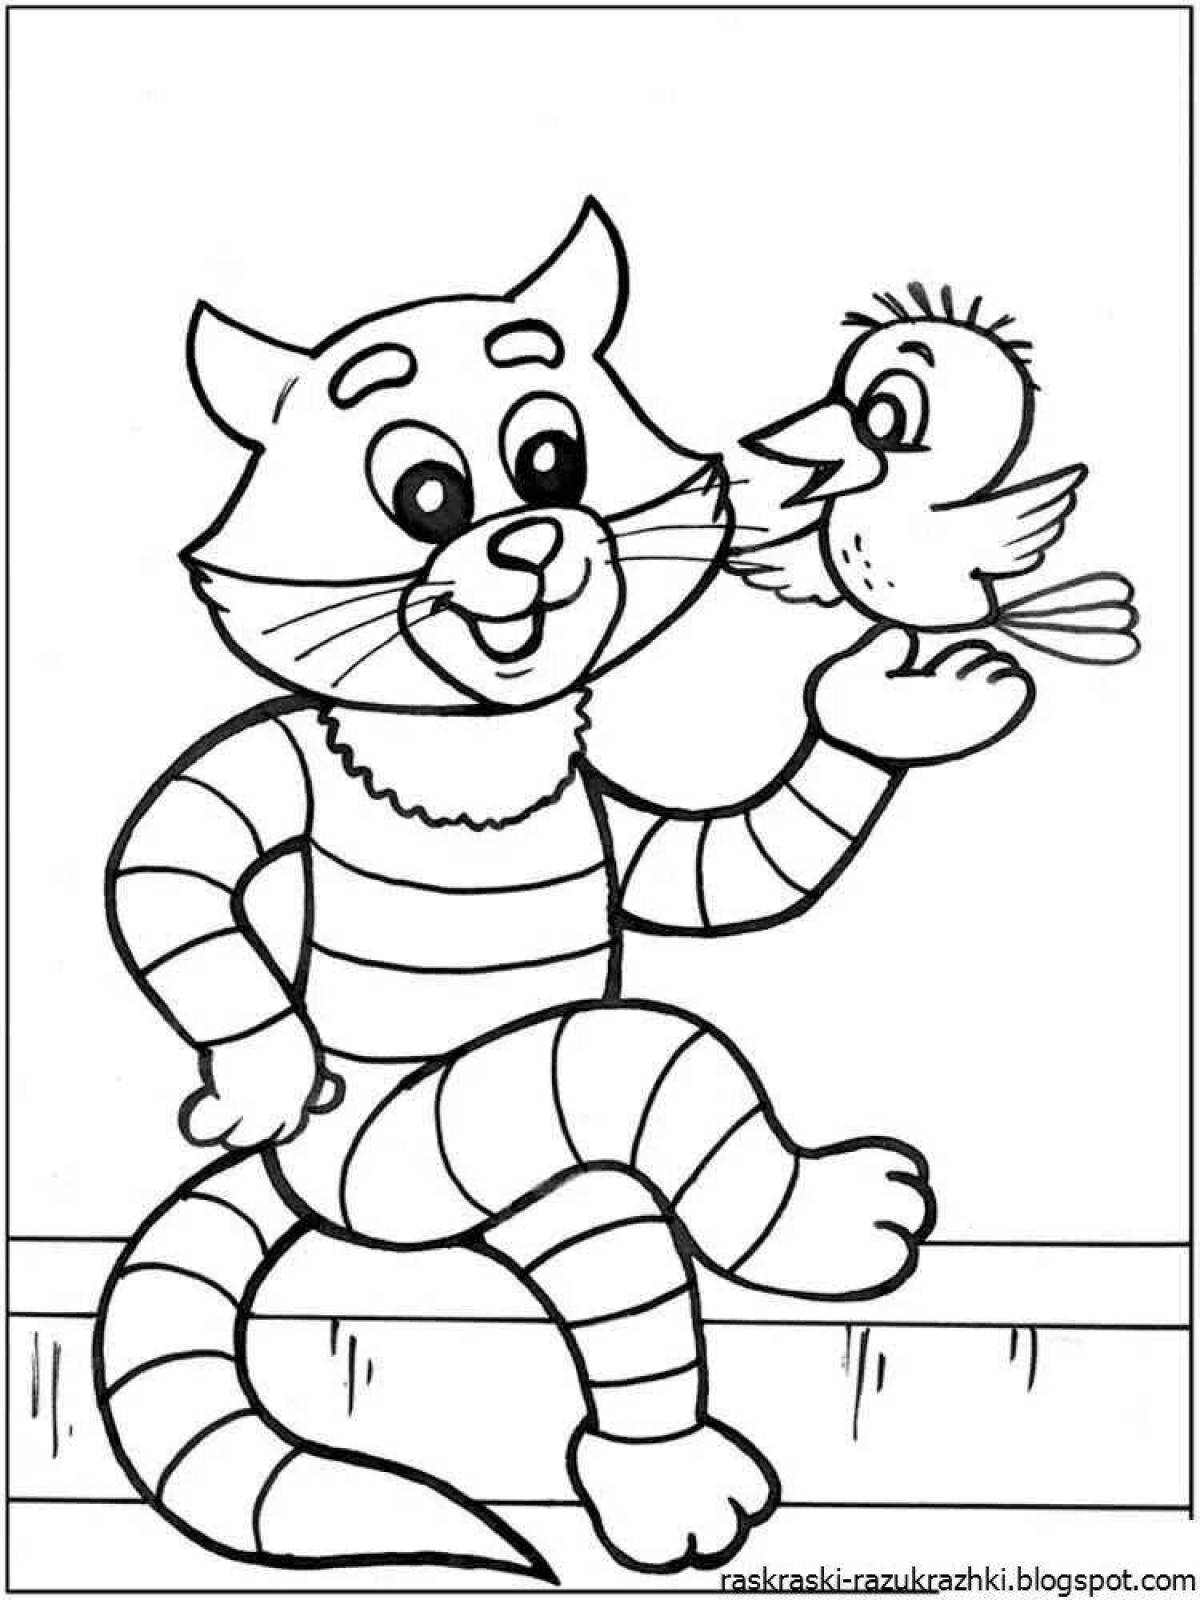 Bright coloring pages of prostokvashino